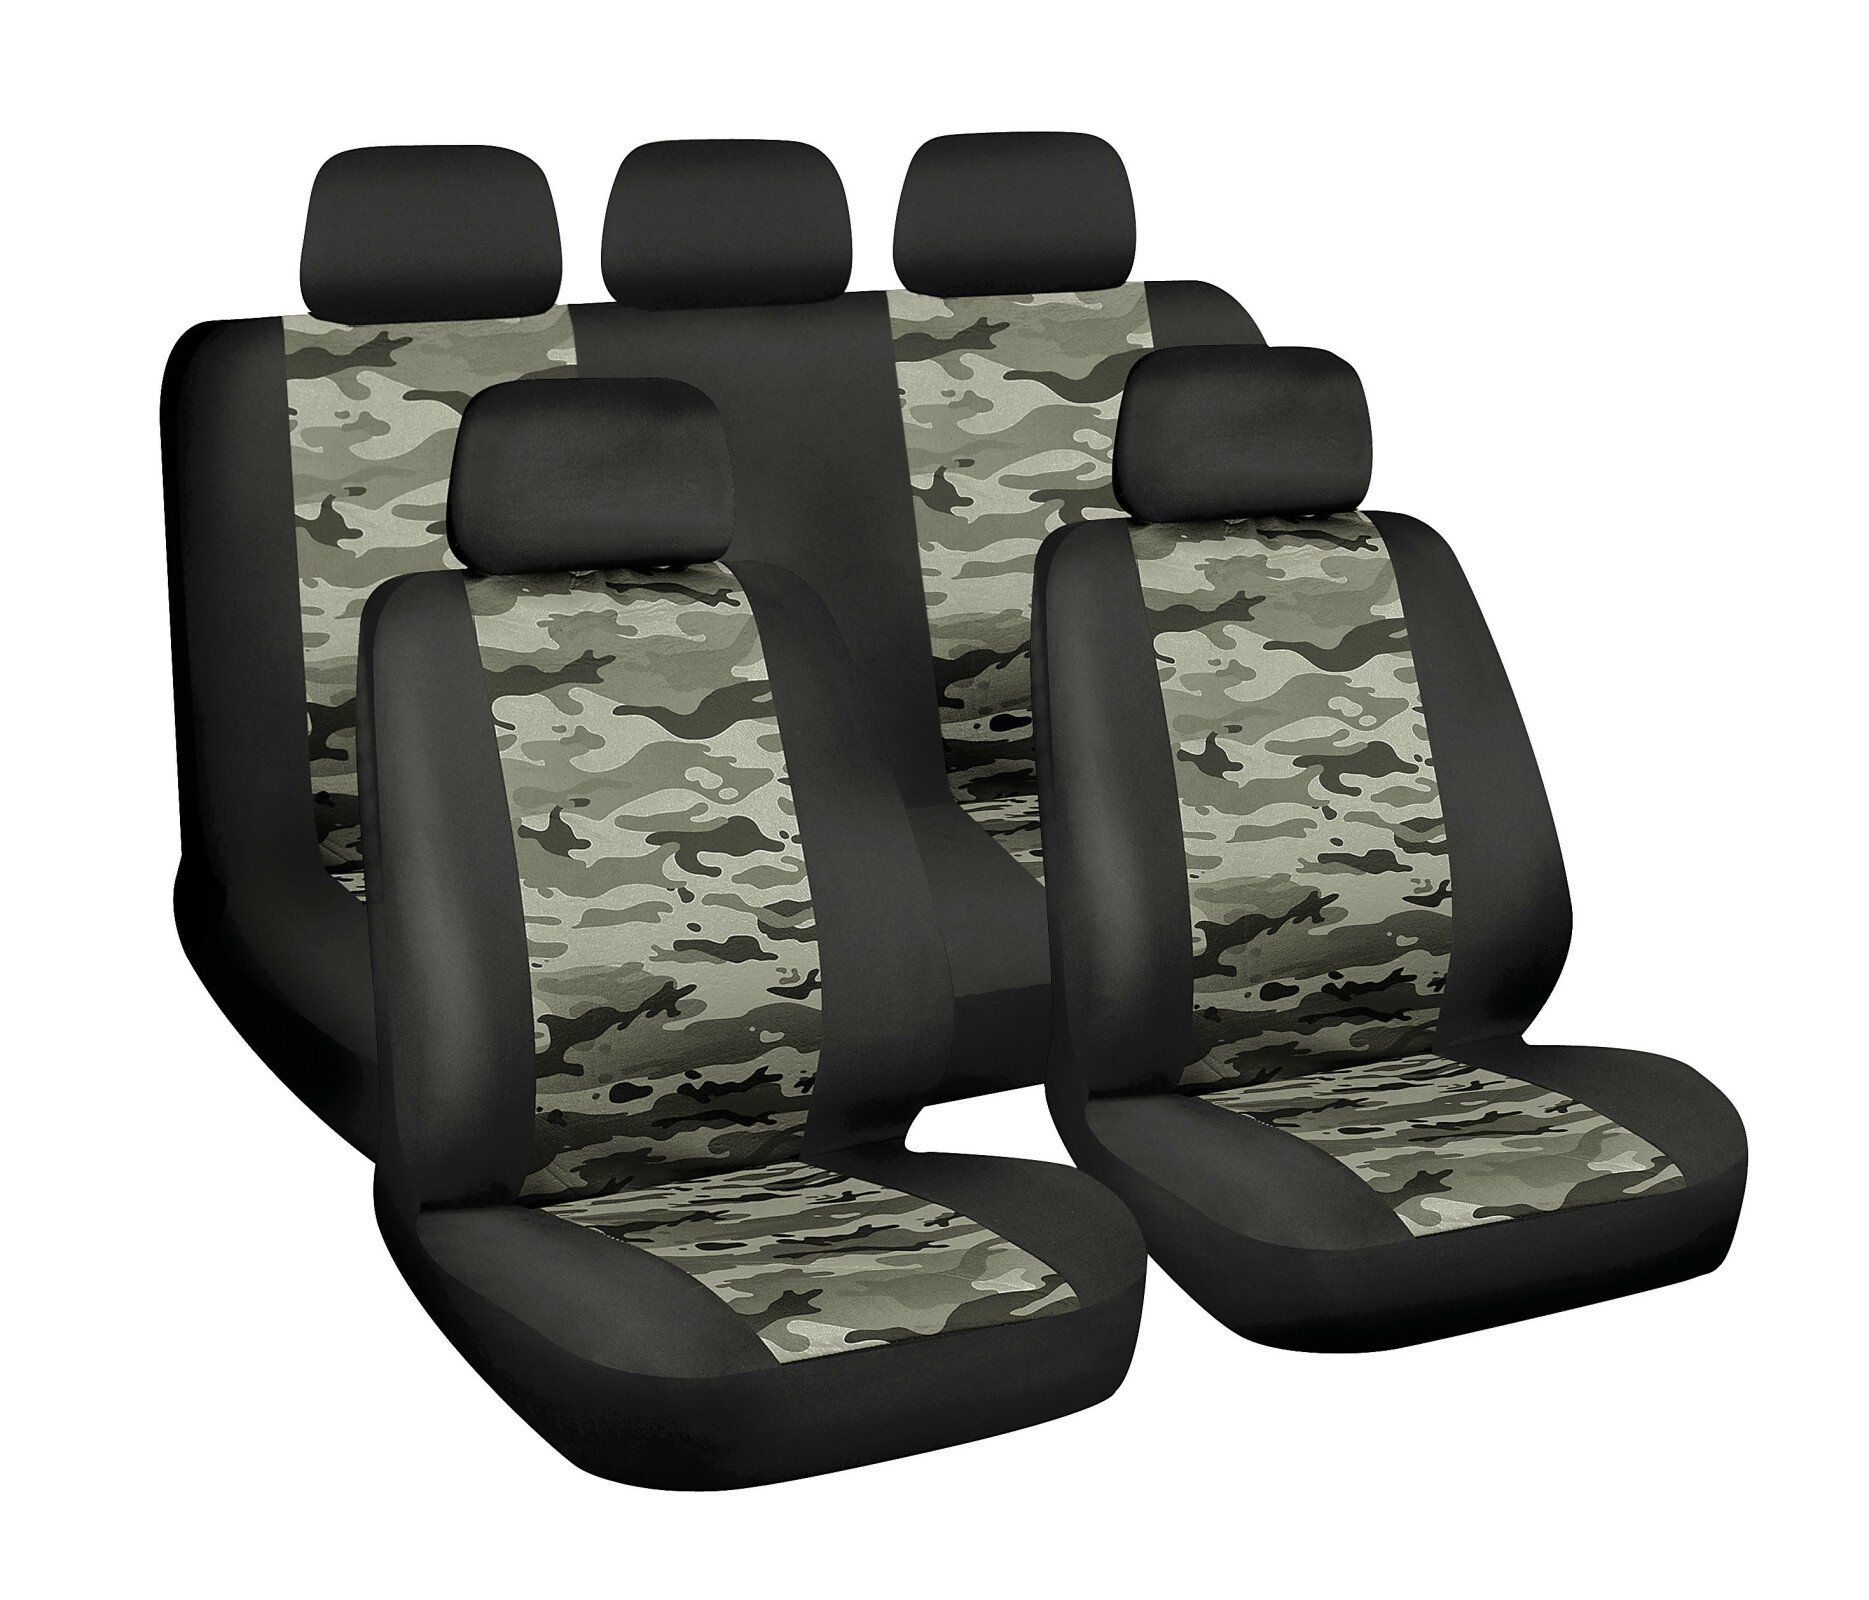 Camo Air-Force, seat cover set thumb